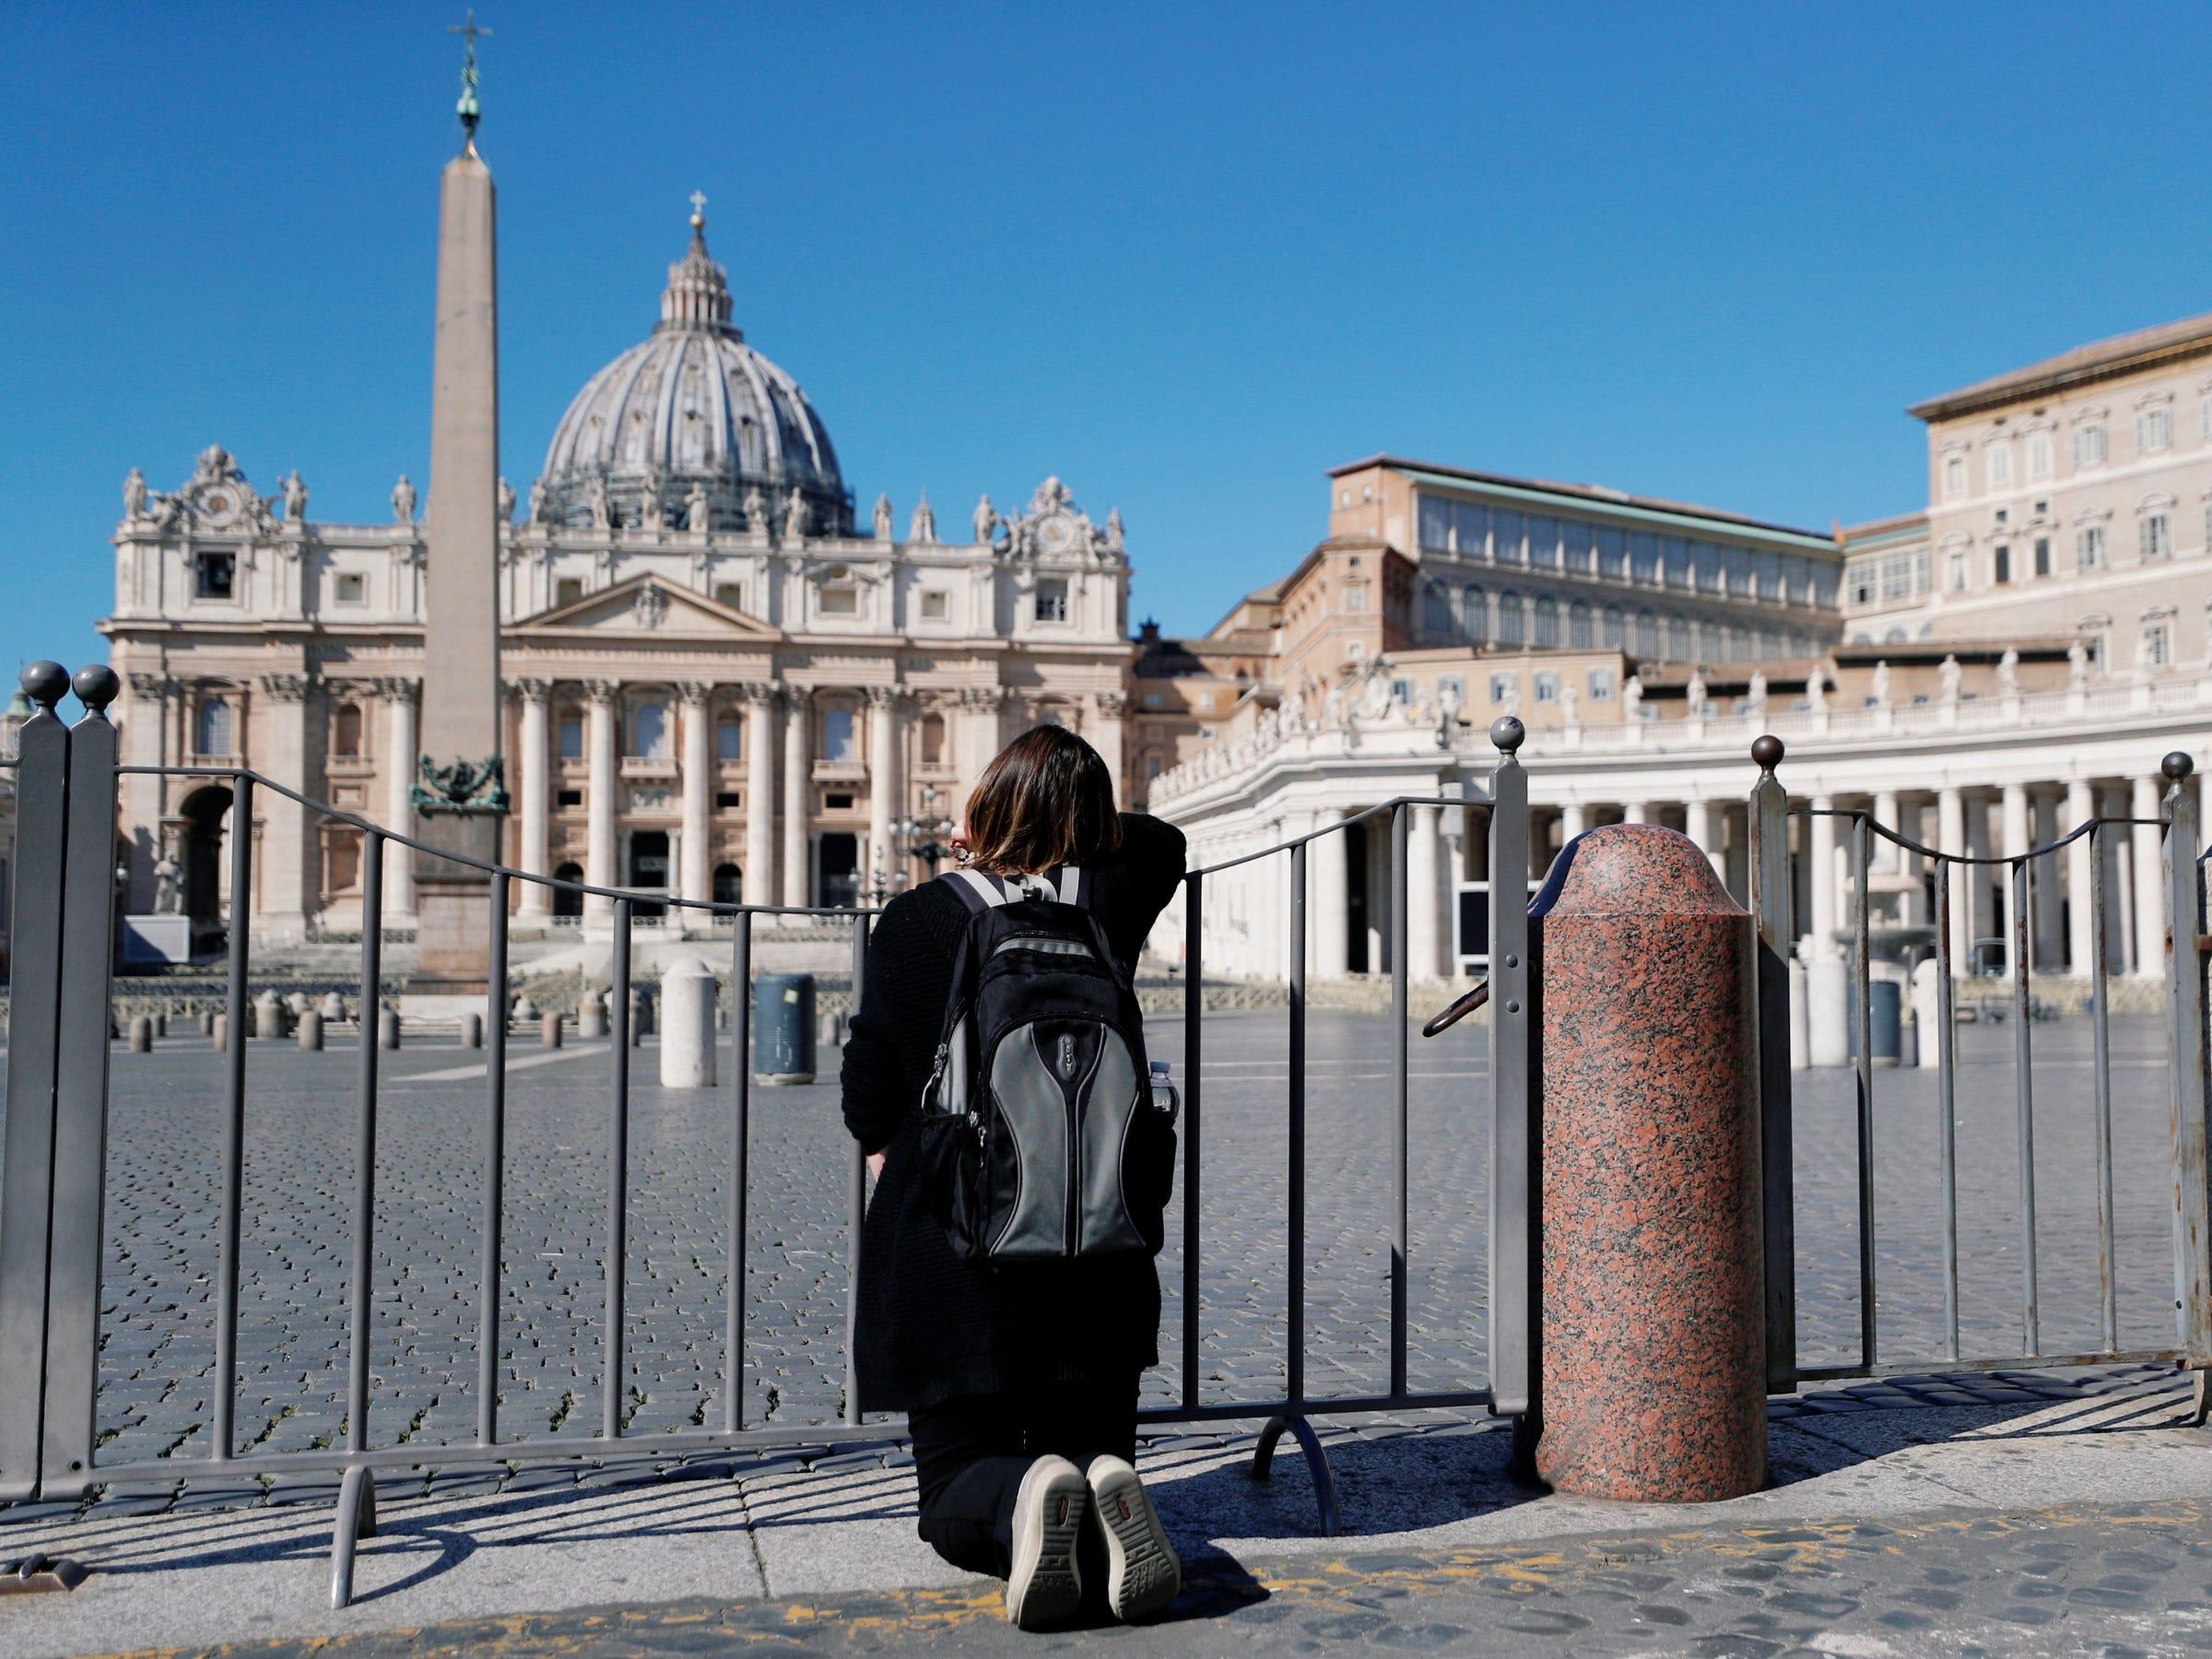 AFTER: With Italy on lockdown, the Vatican remains empty.